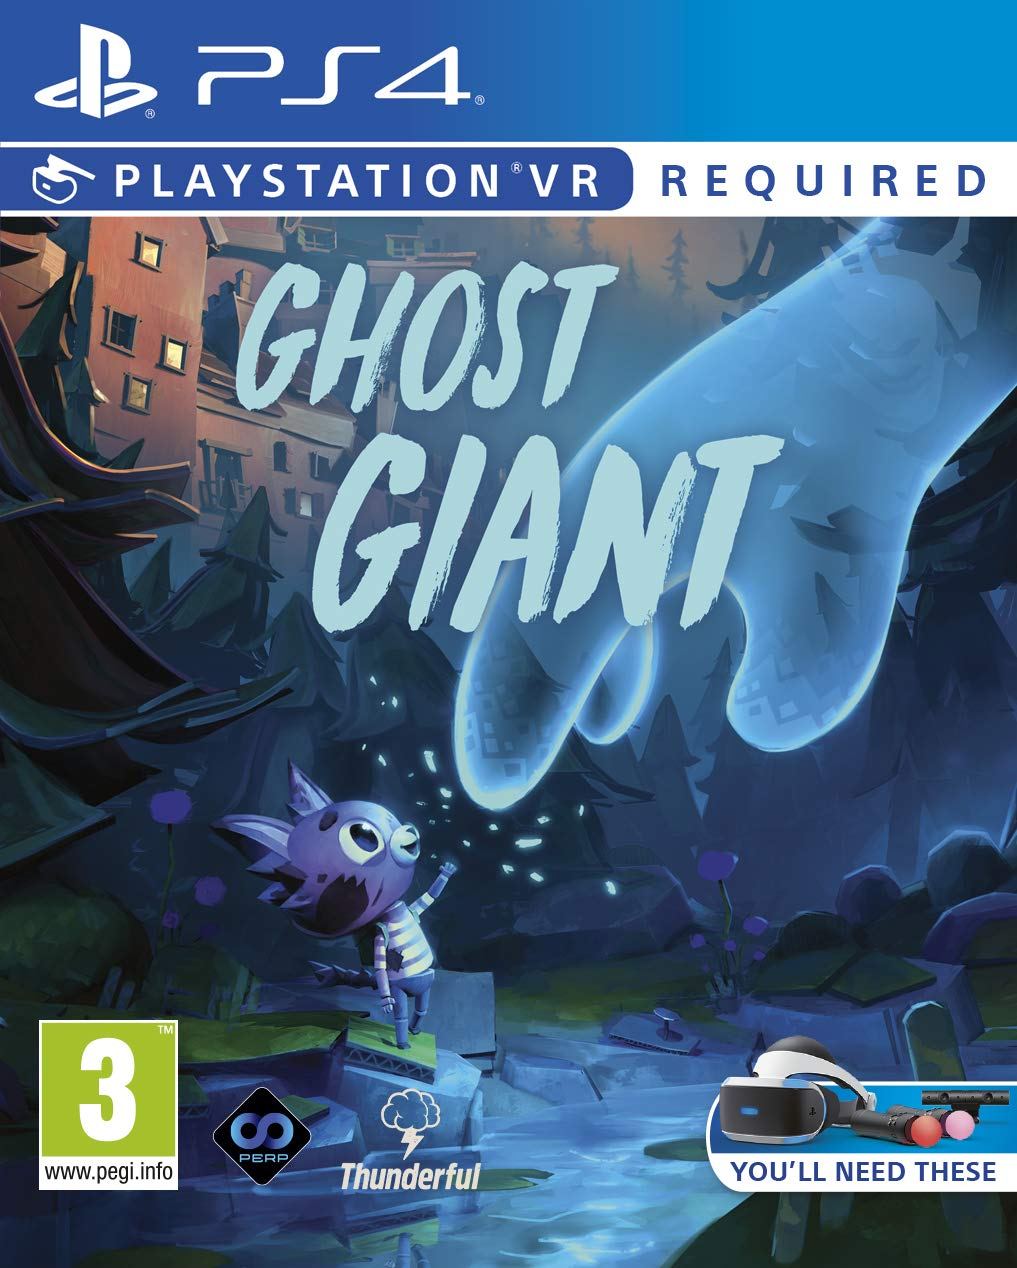 download ghost giant steam